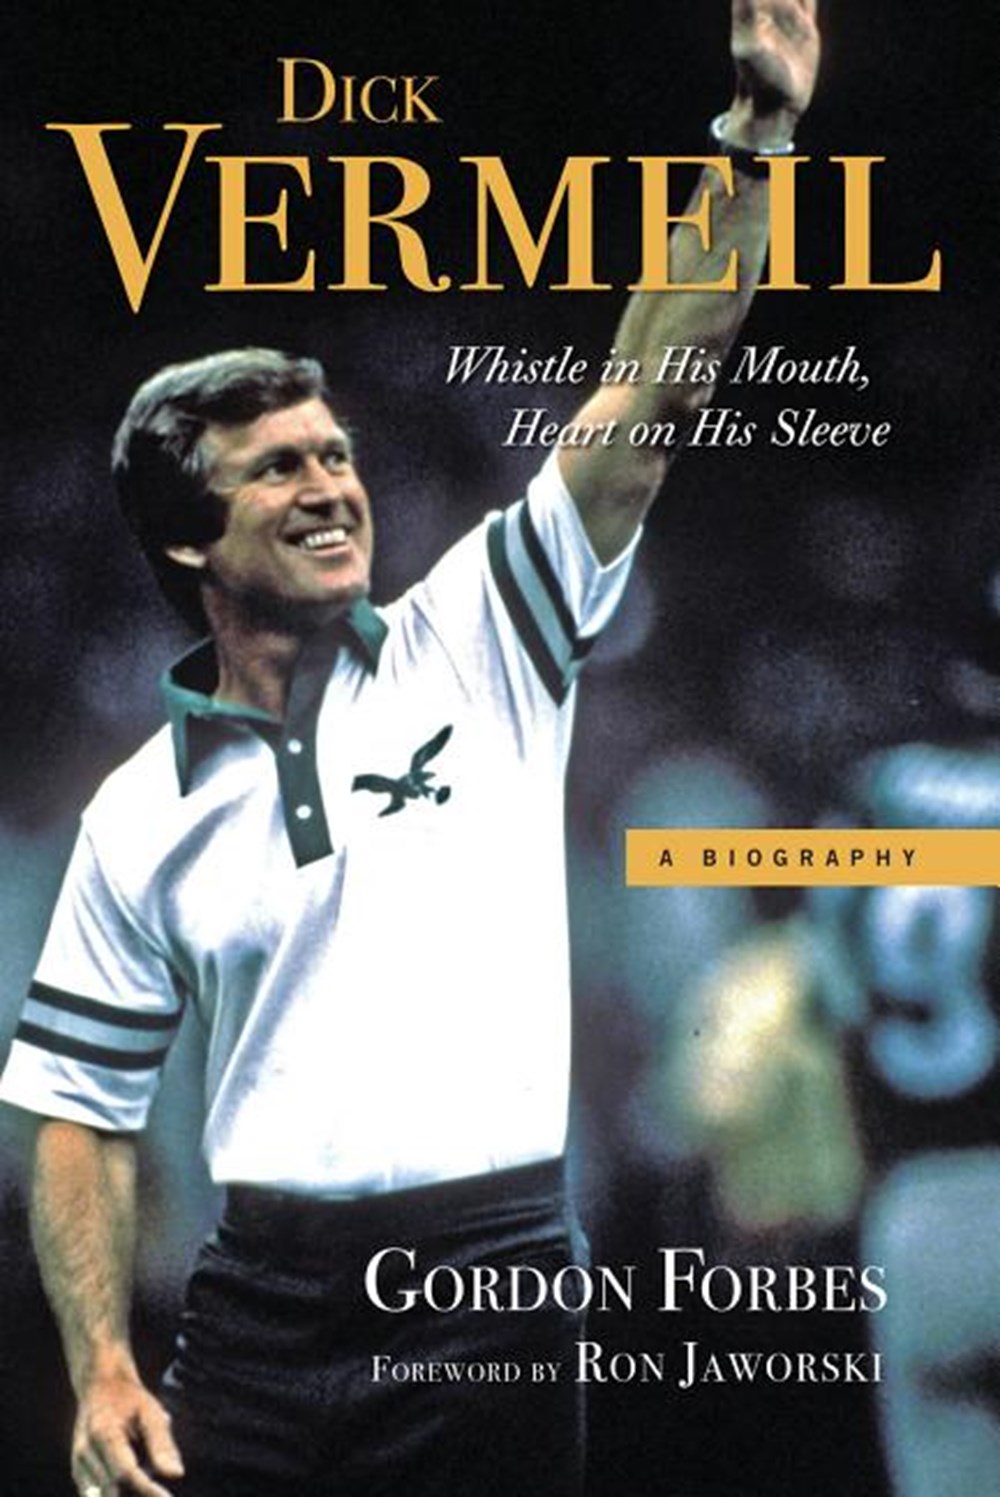 Dick Vermeil: Whistle in His Mouth, Heart on His Sleeve